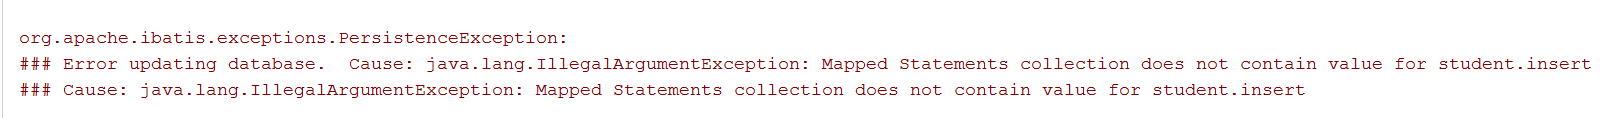 Mapped-Statements-collection.png